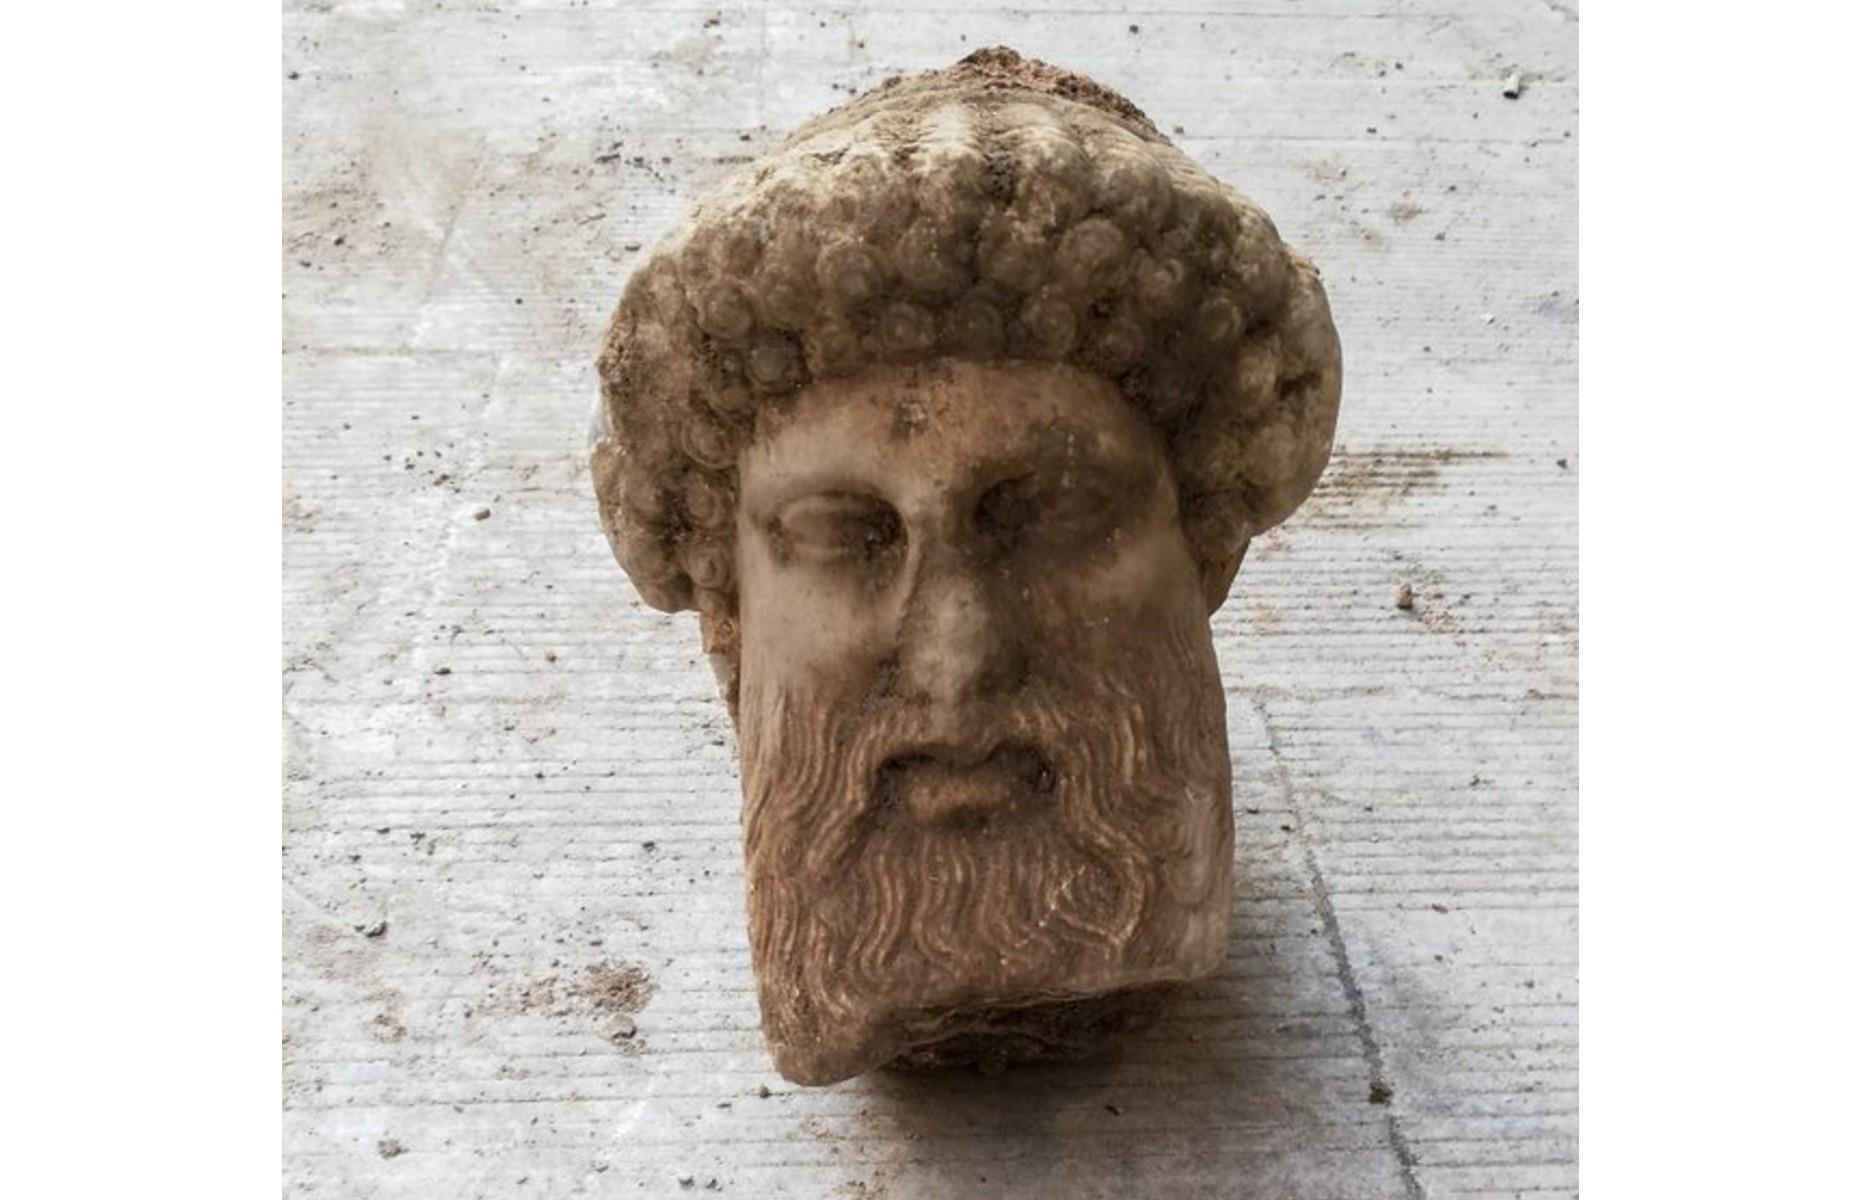 Hermes head found in a sewer, Greece